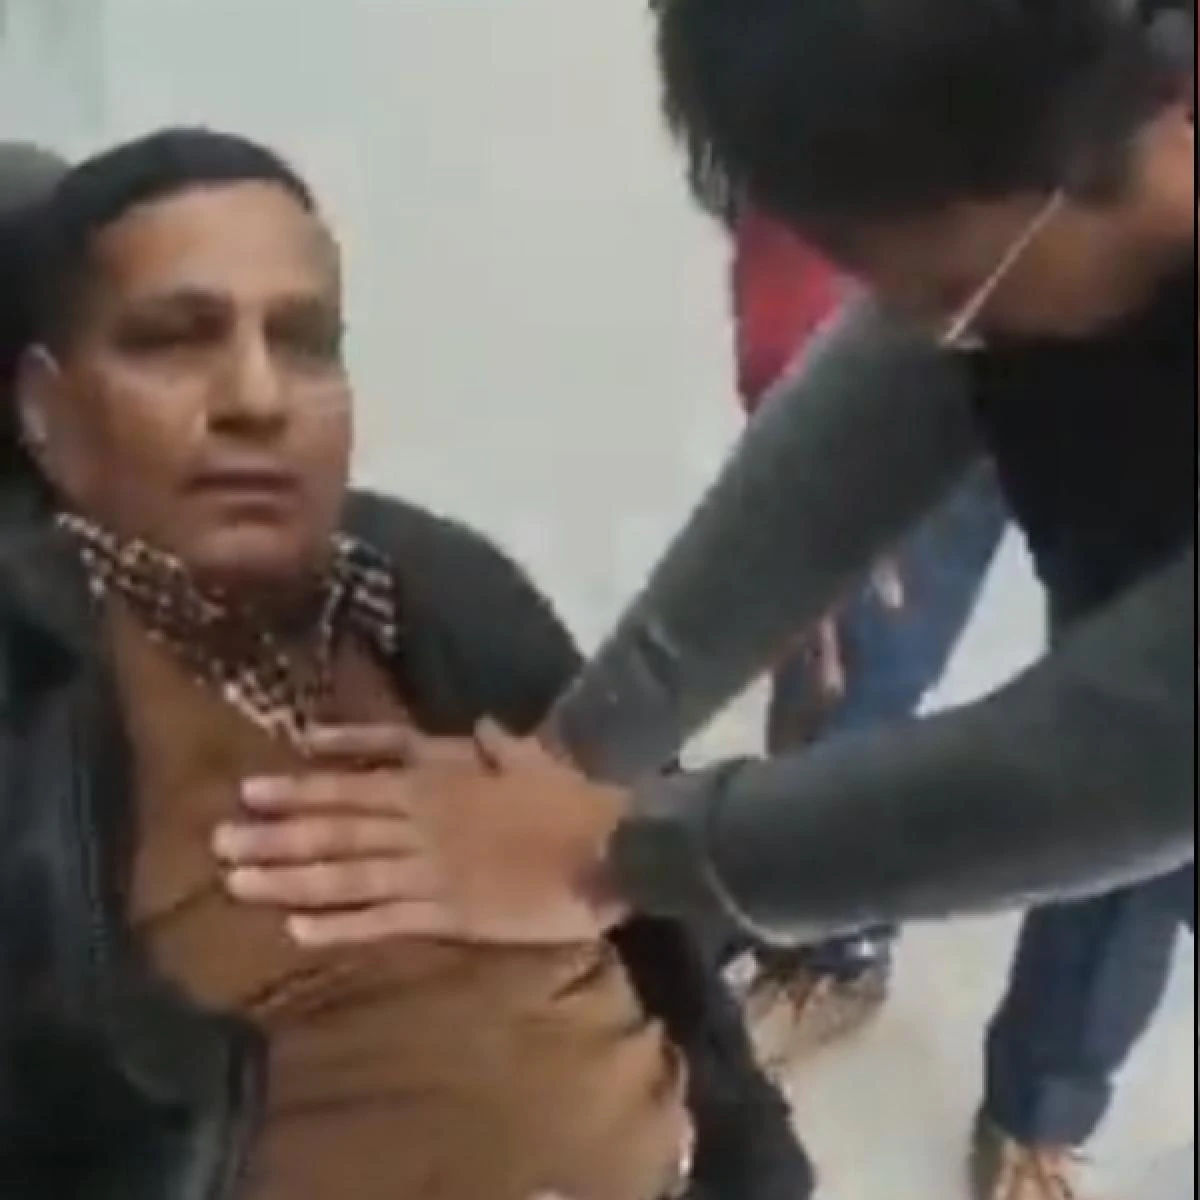 Video: Alert IAS officer does CPR to save man who collapses after heart attack in govt office